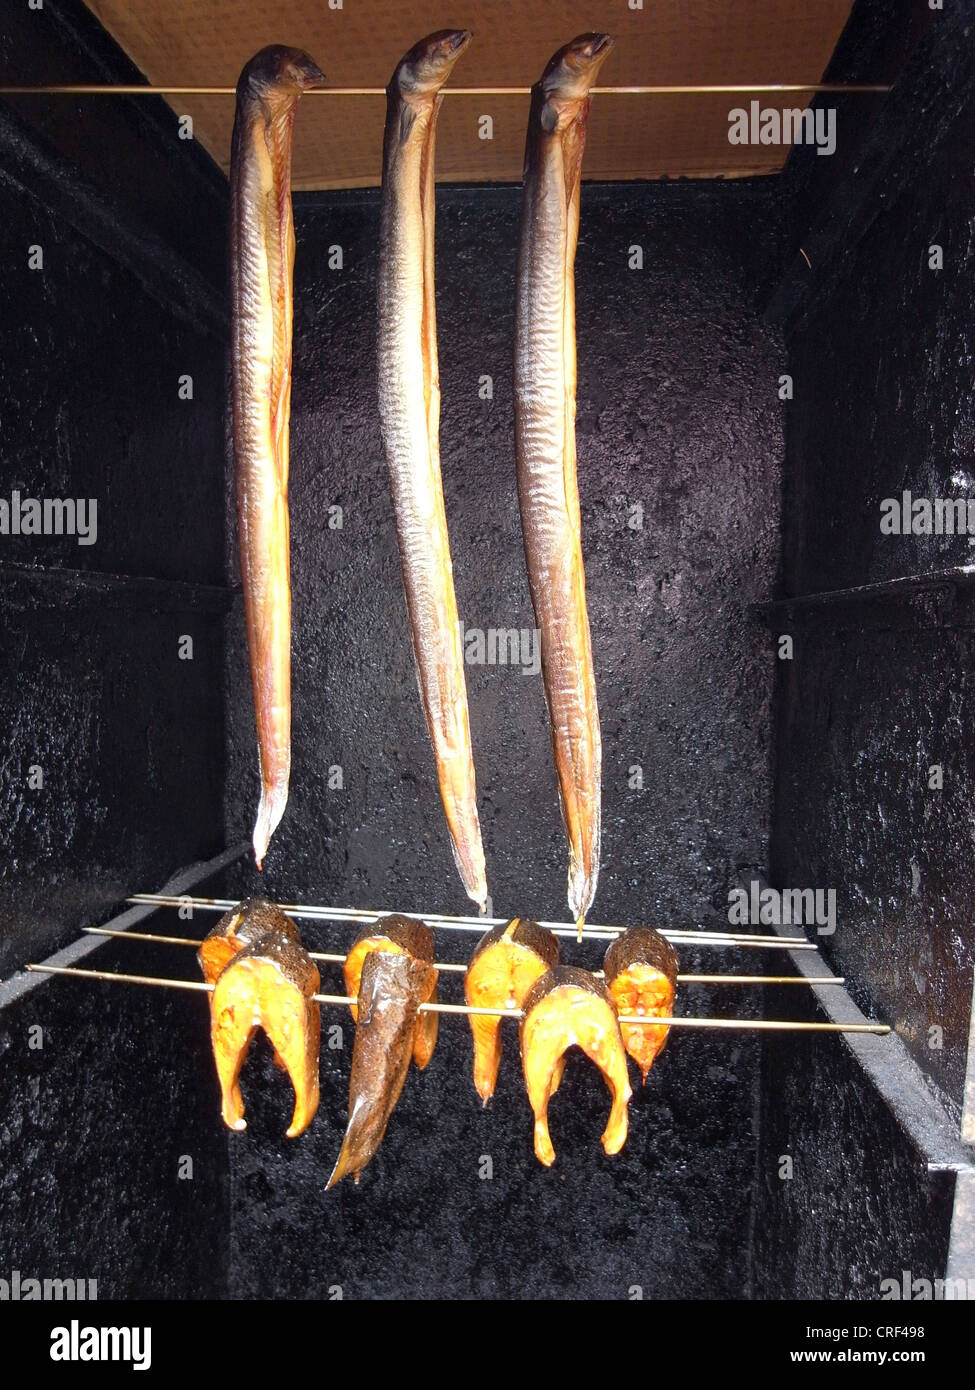 cured eels and cured salmons, Germany, Mecklenburg-Western Pomerania Stock Photo